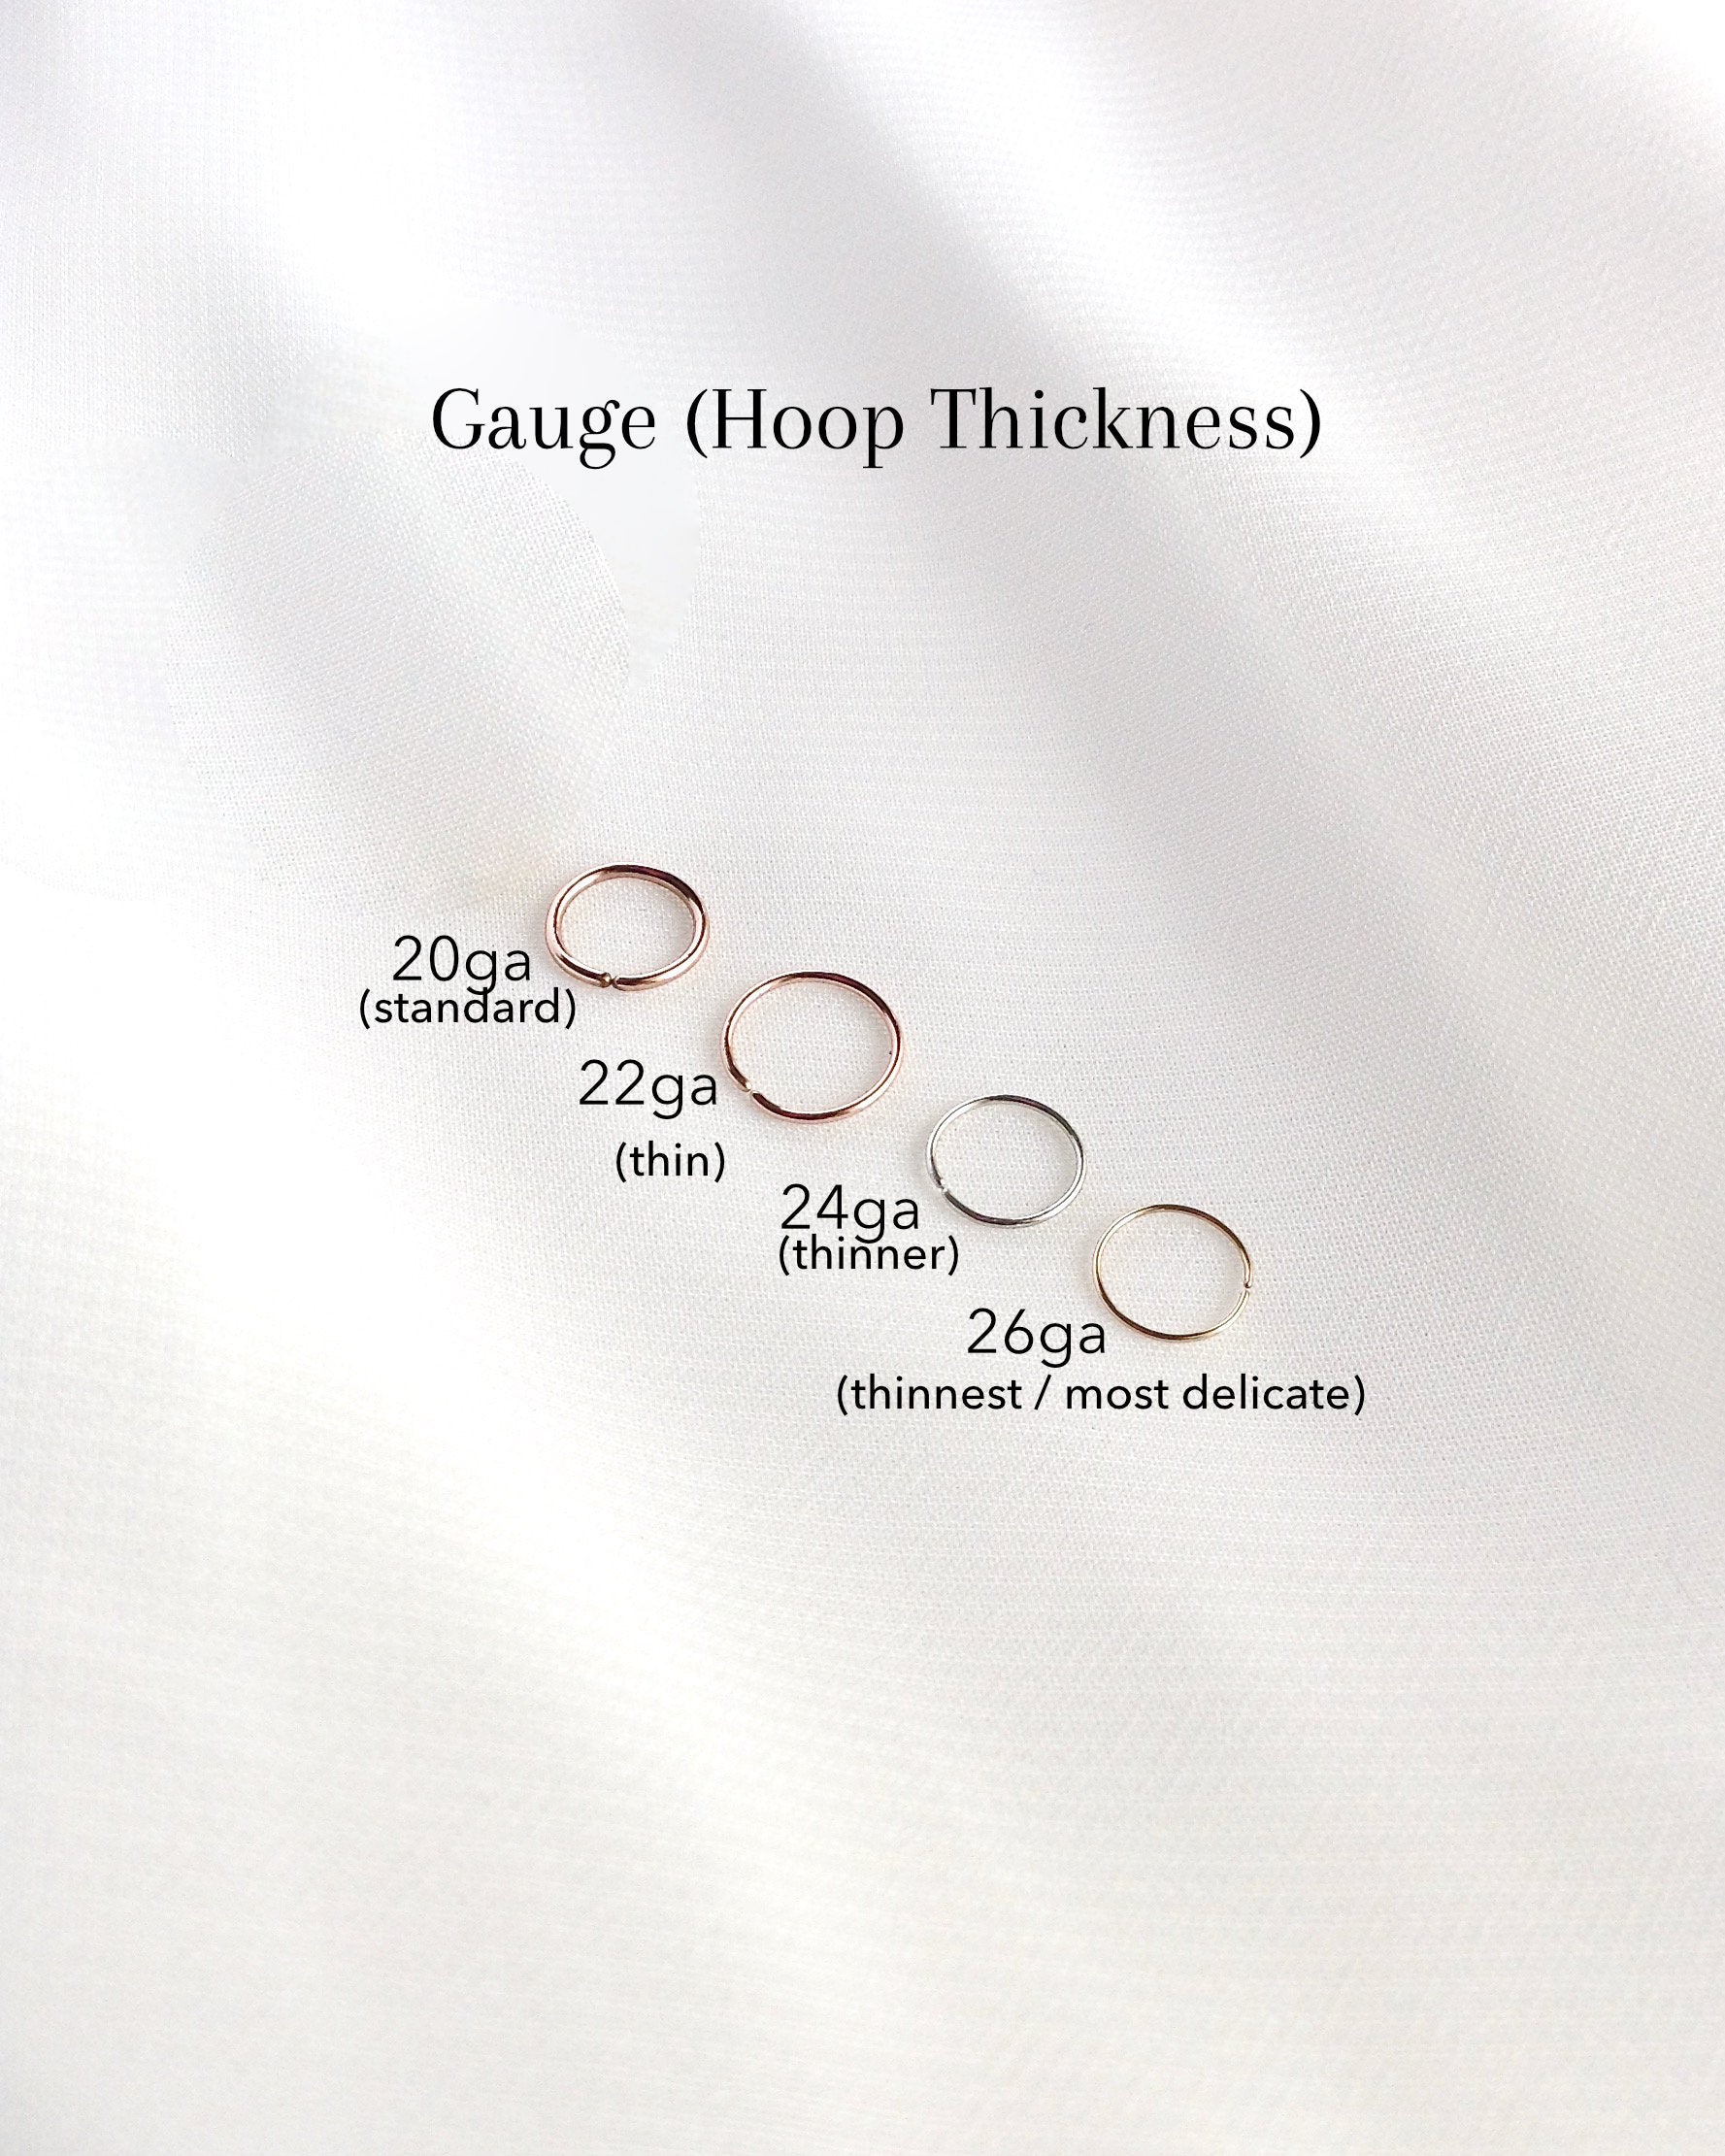 typical nose ring gauge size